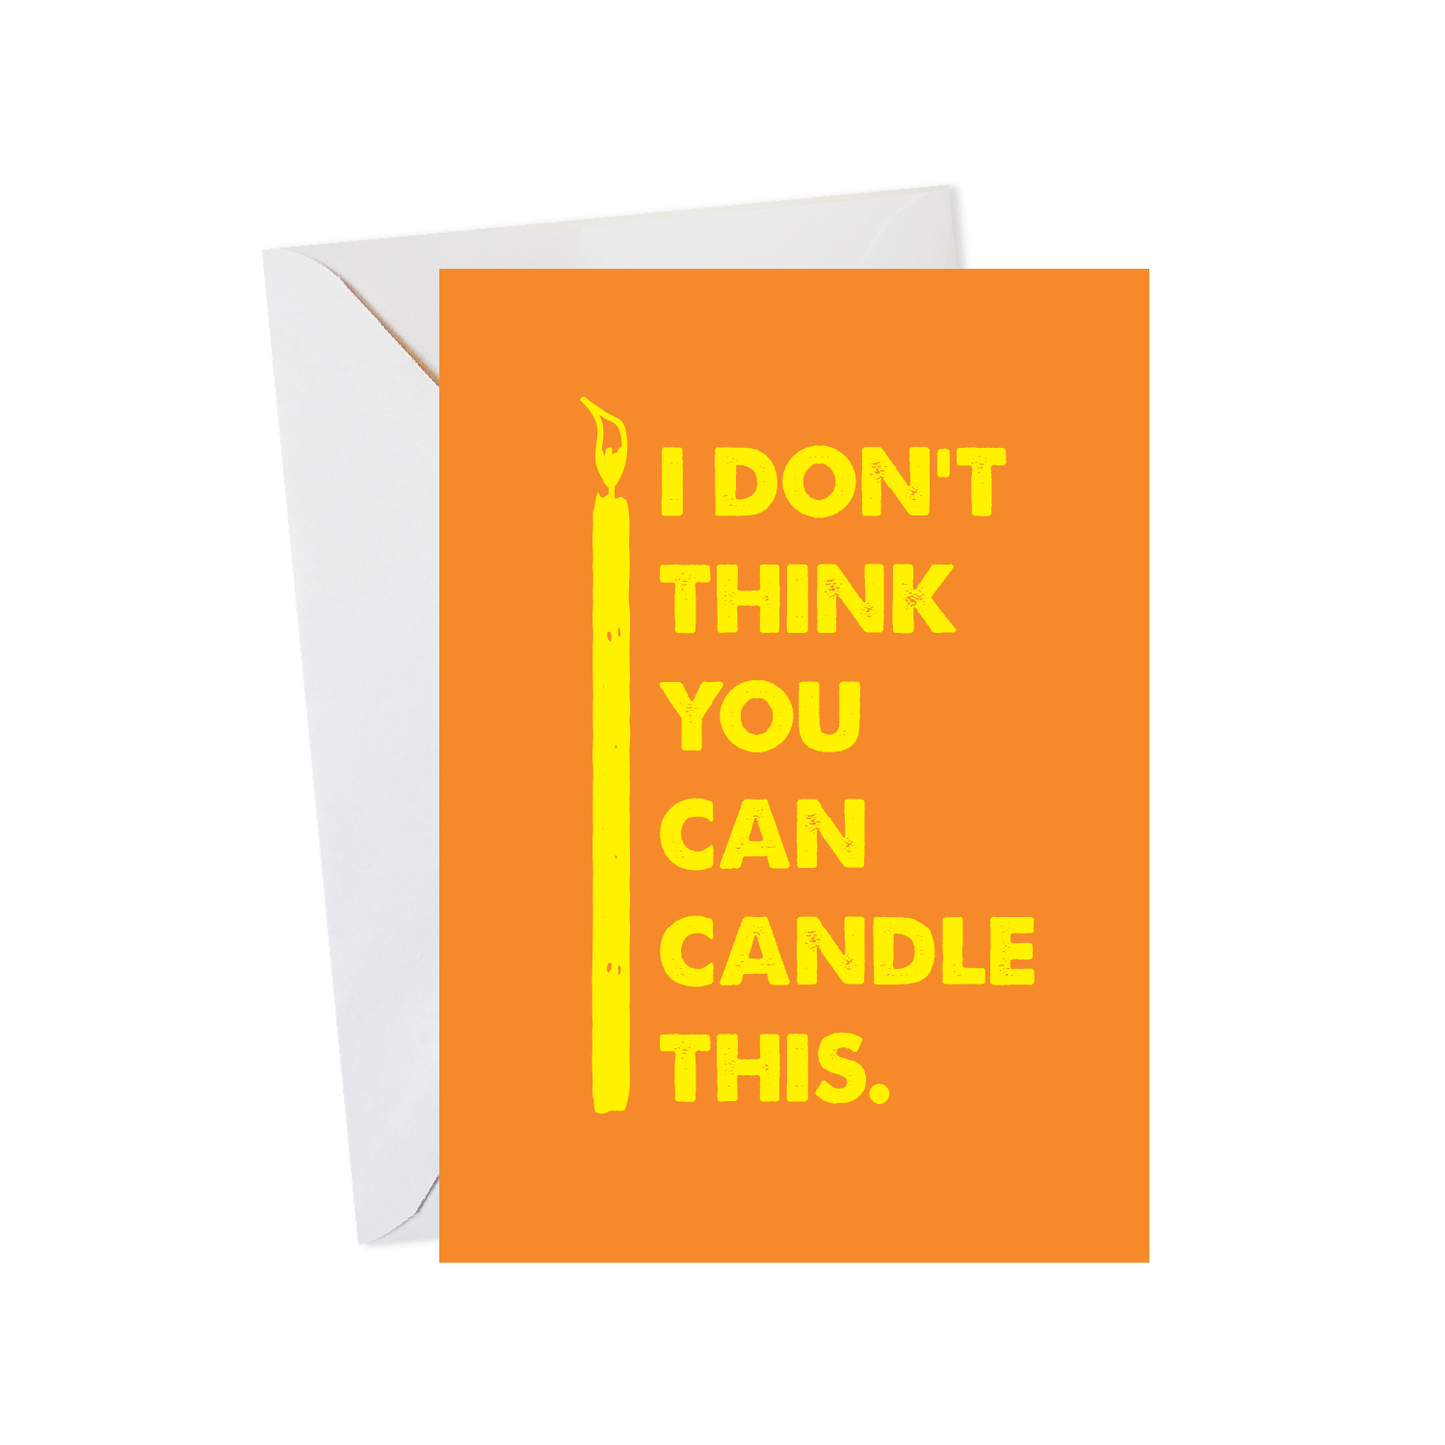 Our Worst Sellers - 5 Card Gift Set